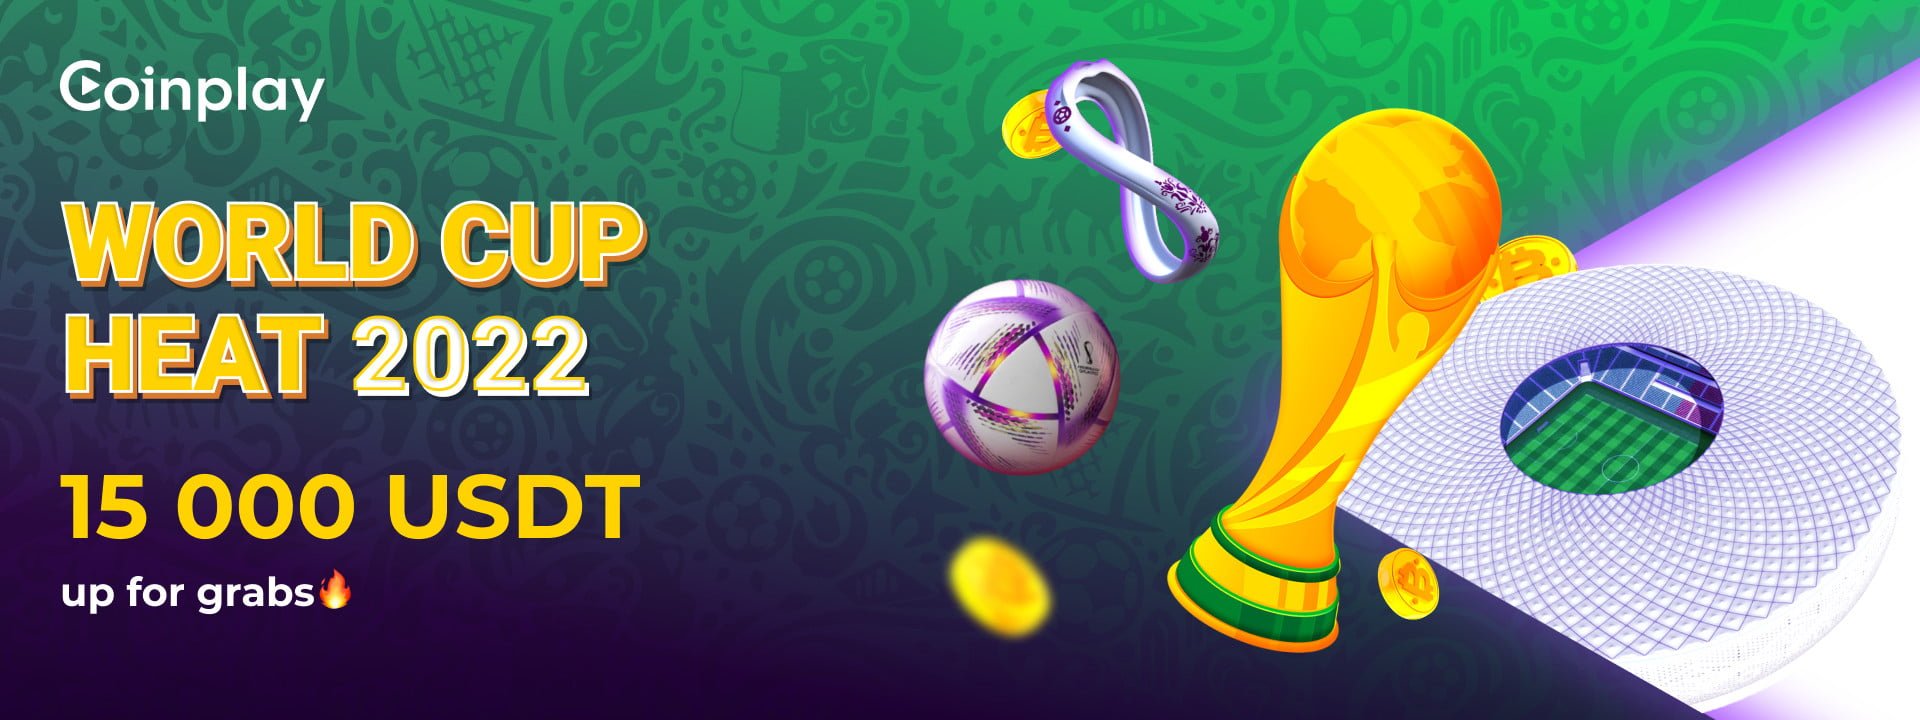 World Cup is more exciting with Welcome bonus up to 5,000 USDT from Coinplay 14